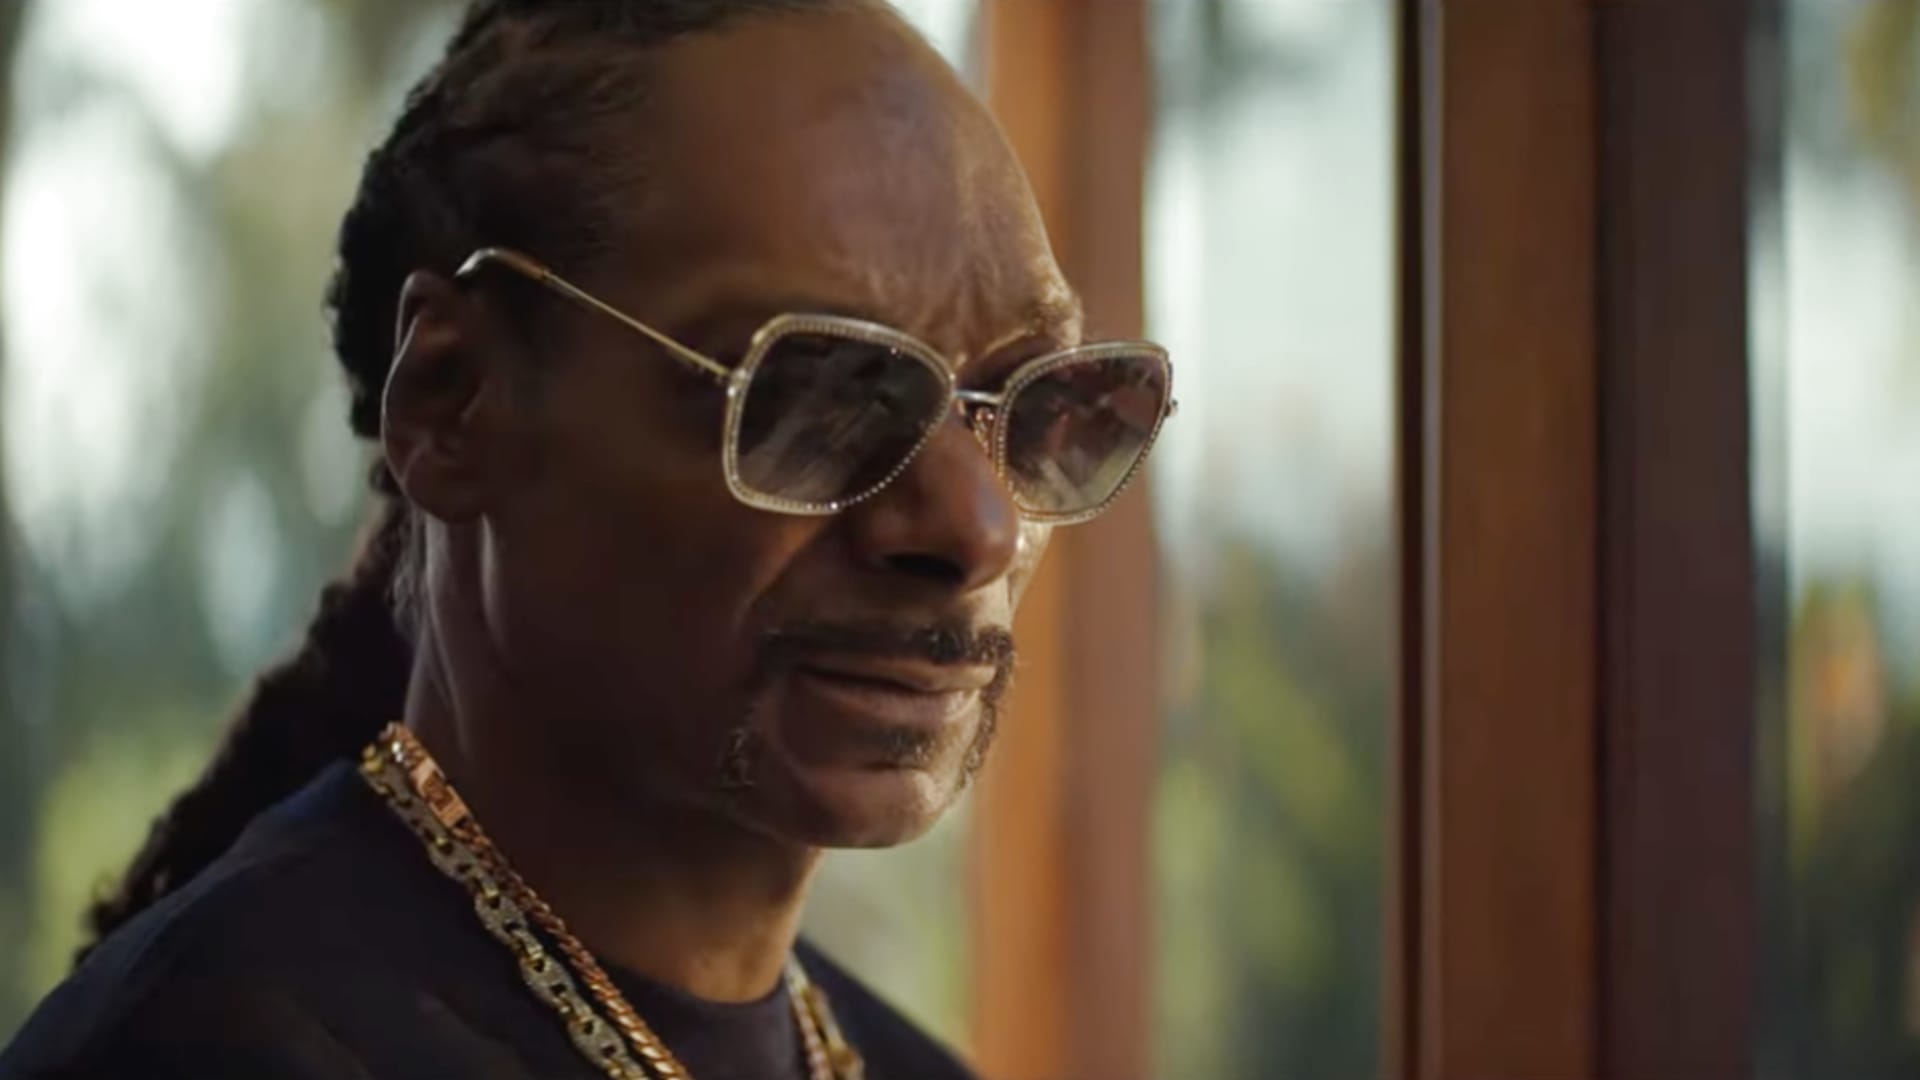 Petco collaborates with Snoop Dogg in new pet-care campaign